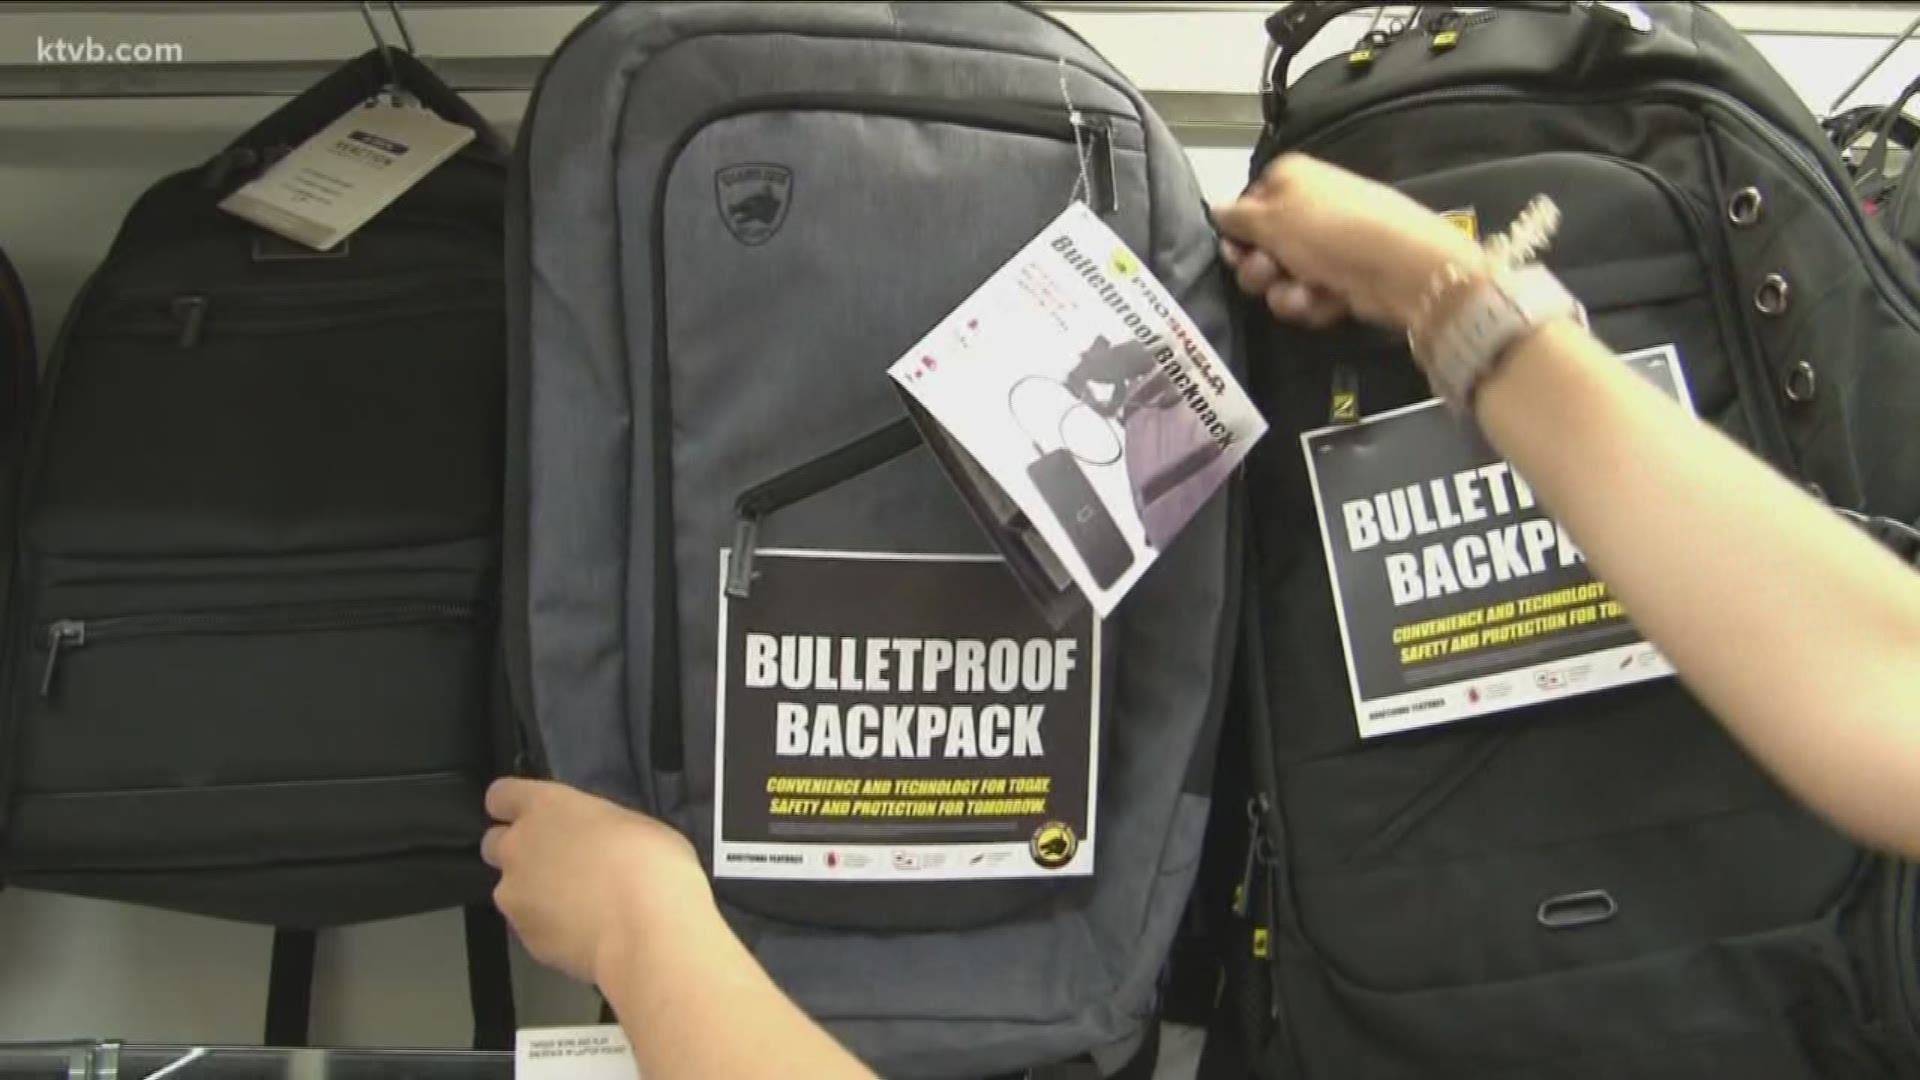 Some parents are turning to these backpacks to protect their children.